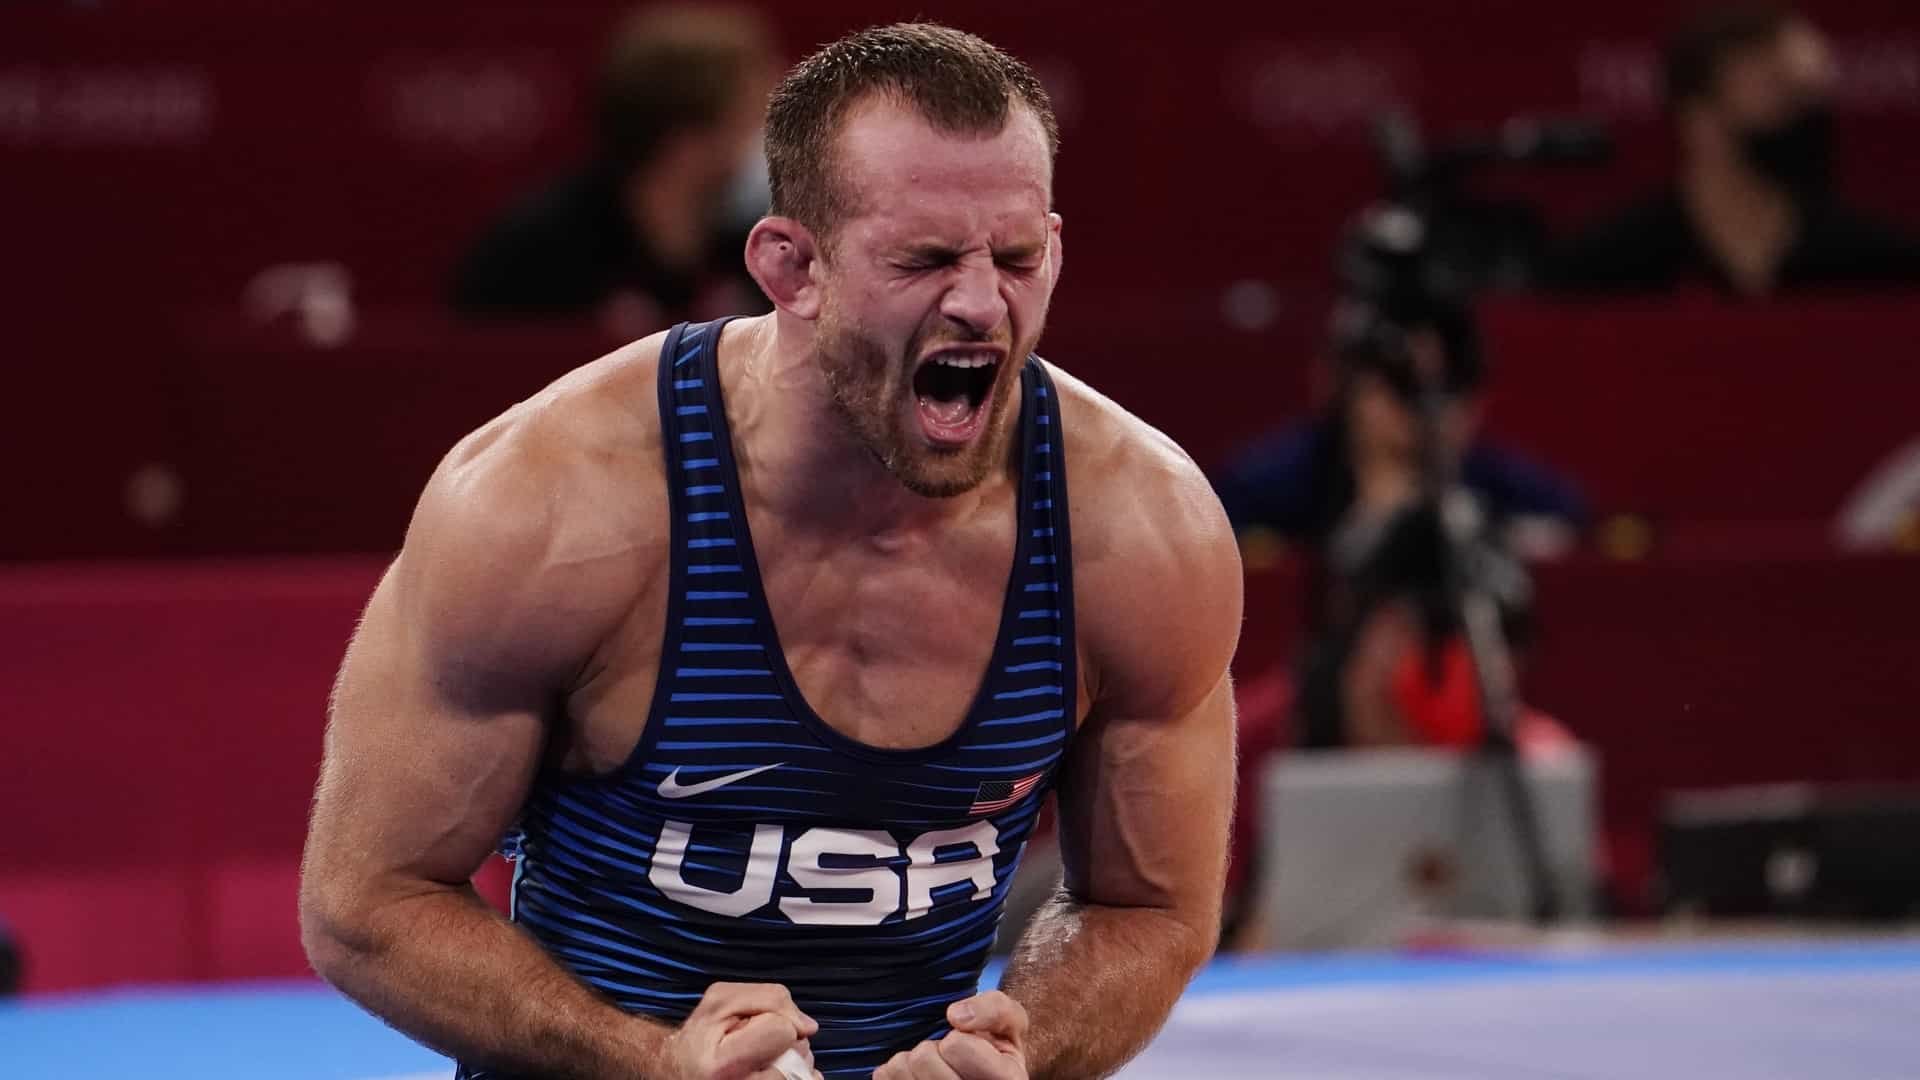 USA's David Taylor strikes late for wrestling gold